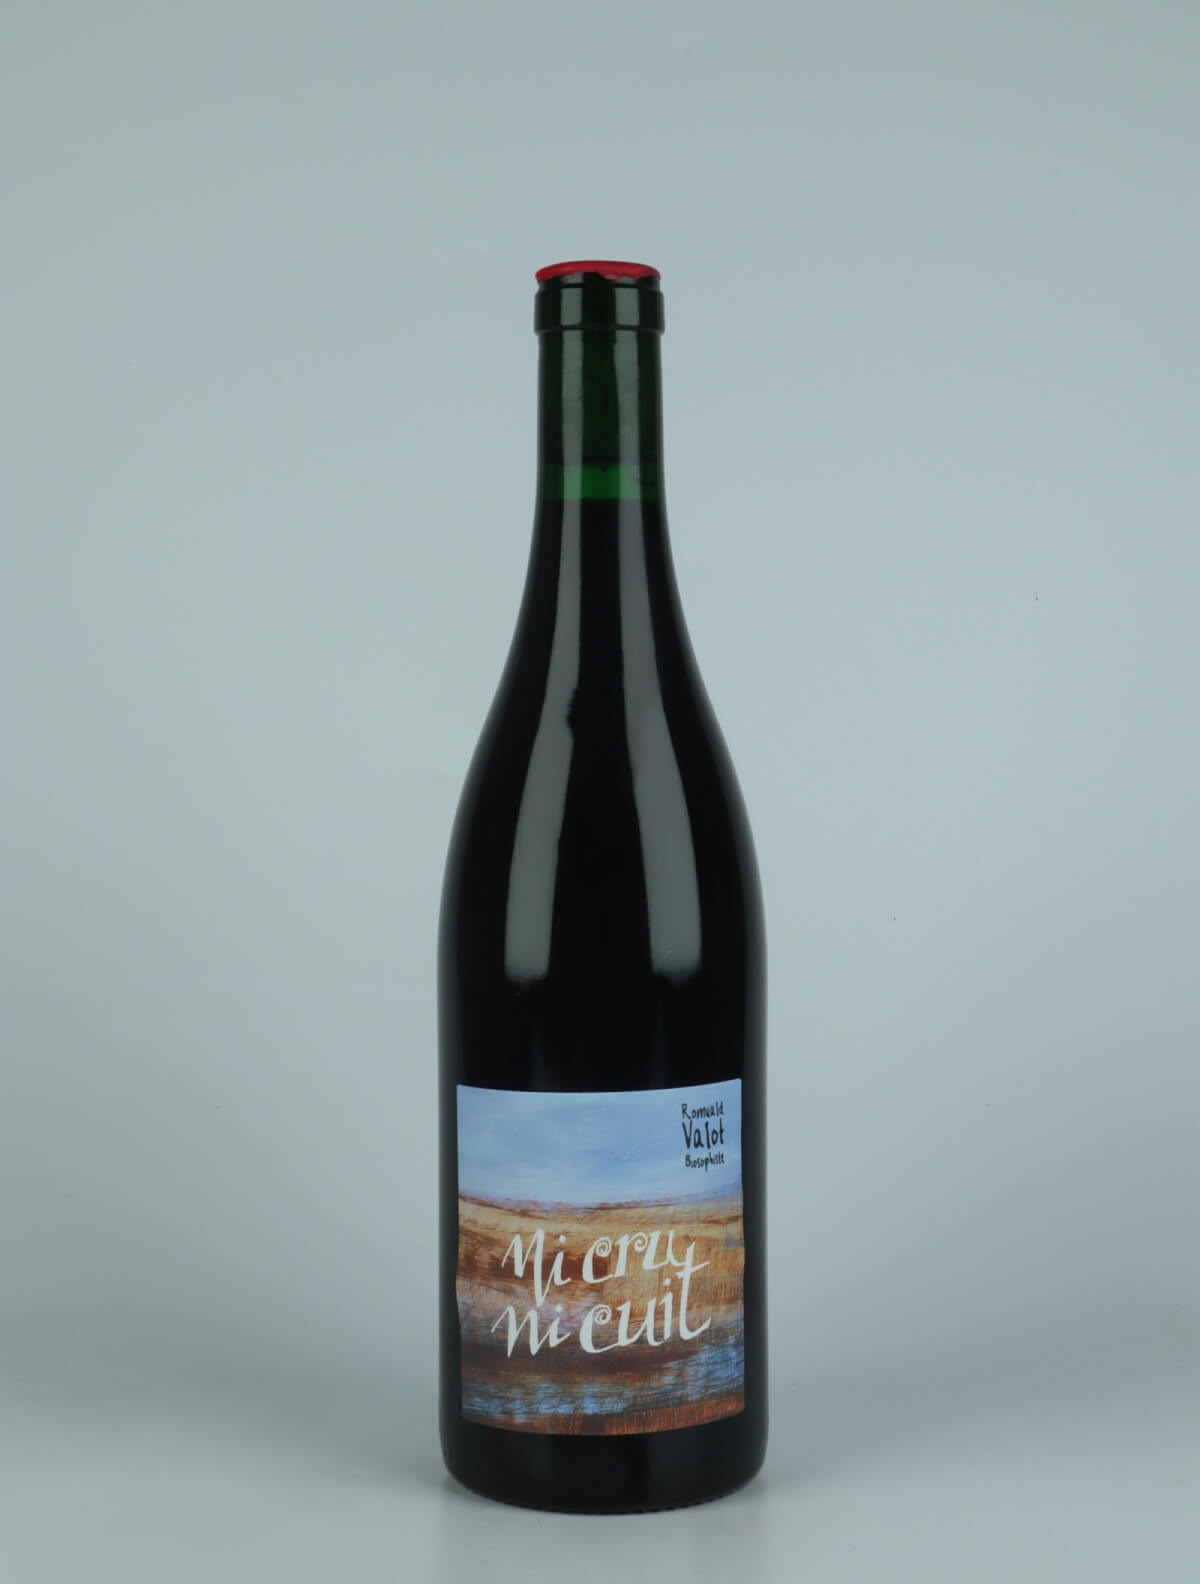 A bottle 2022 Ni Cru ni Cuit Red wine from Romuald Valot, Beaujolais in France